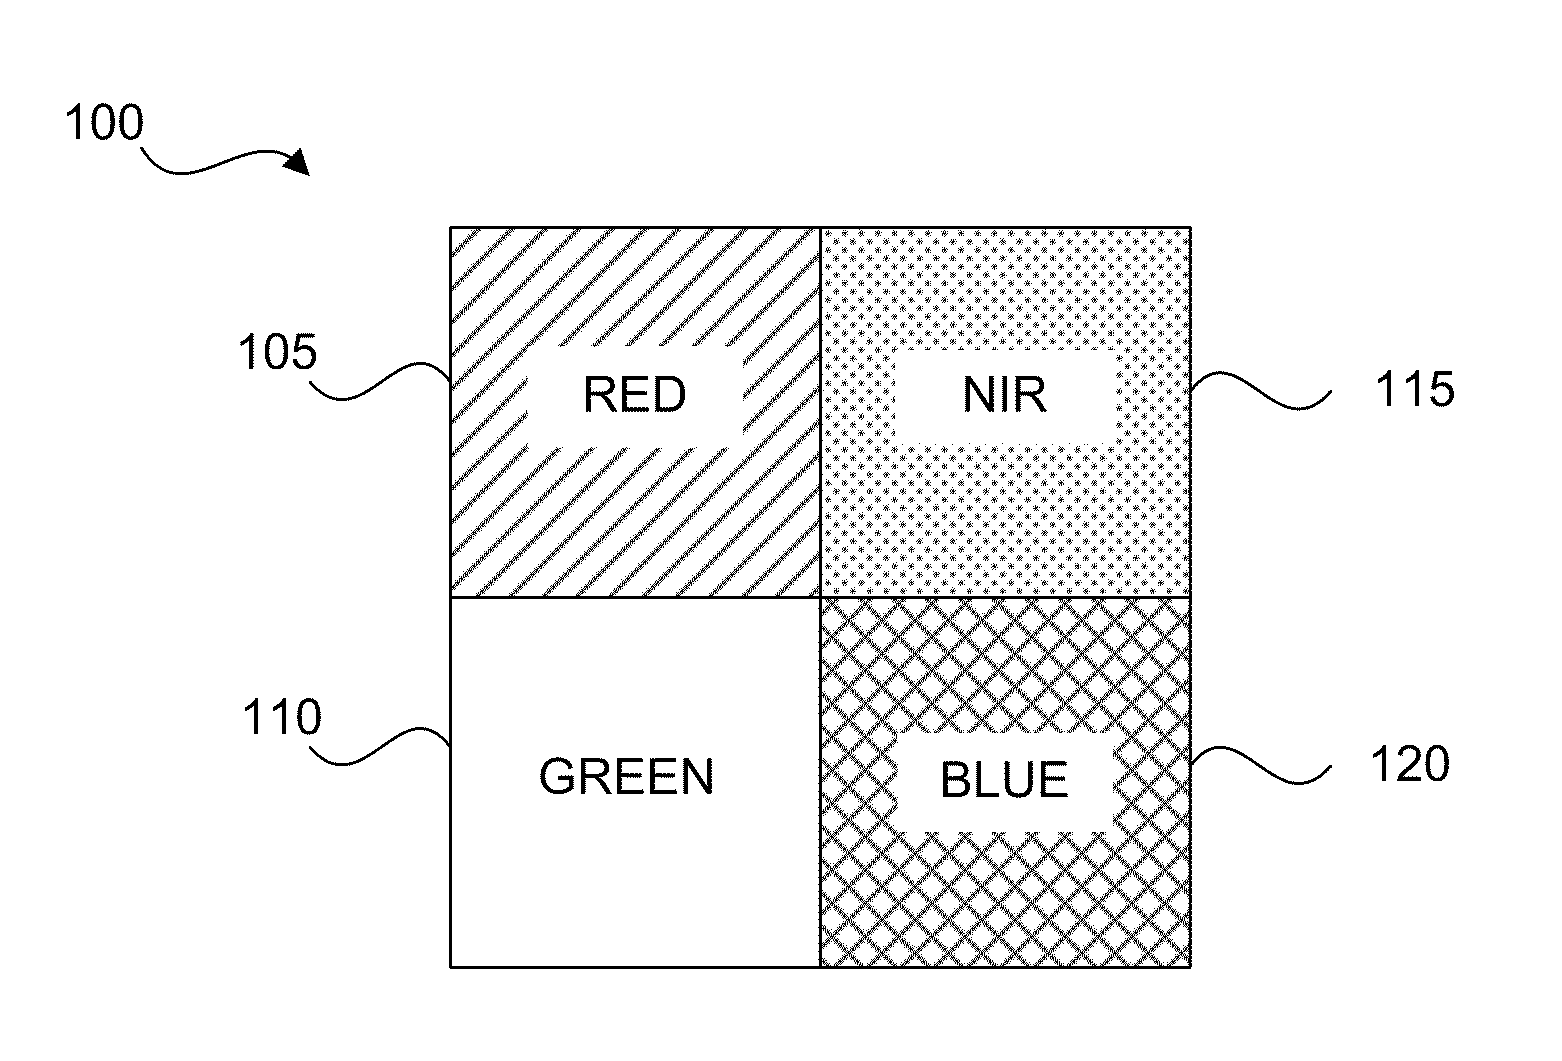 Photosensitive imaging devices and associated methods